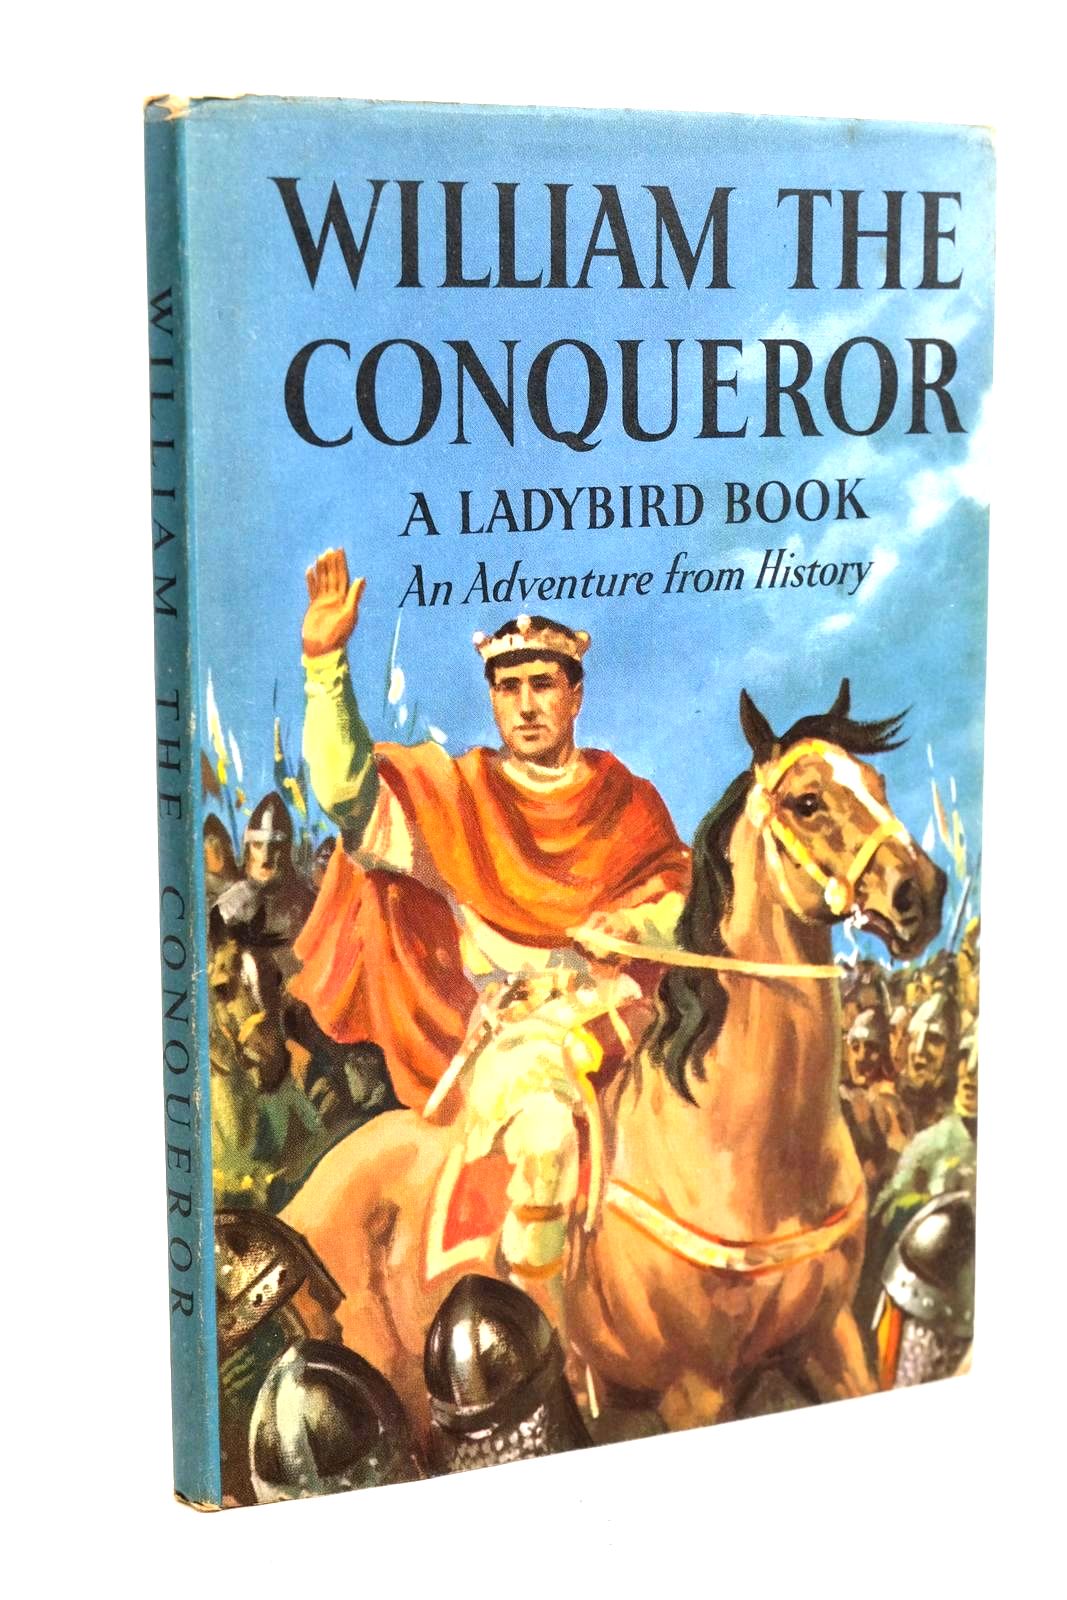 Photo of WILLIAM THE CONQUEROR written by Peach, L. Du Garde illustrated by Kenney, John published by Wills & Hepworth Ltd. (STOCK CODE: 1320622)  for sale by Stella & Rose's Books